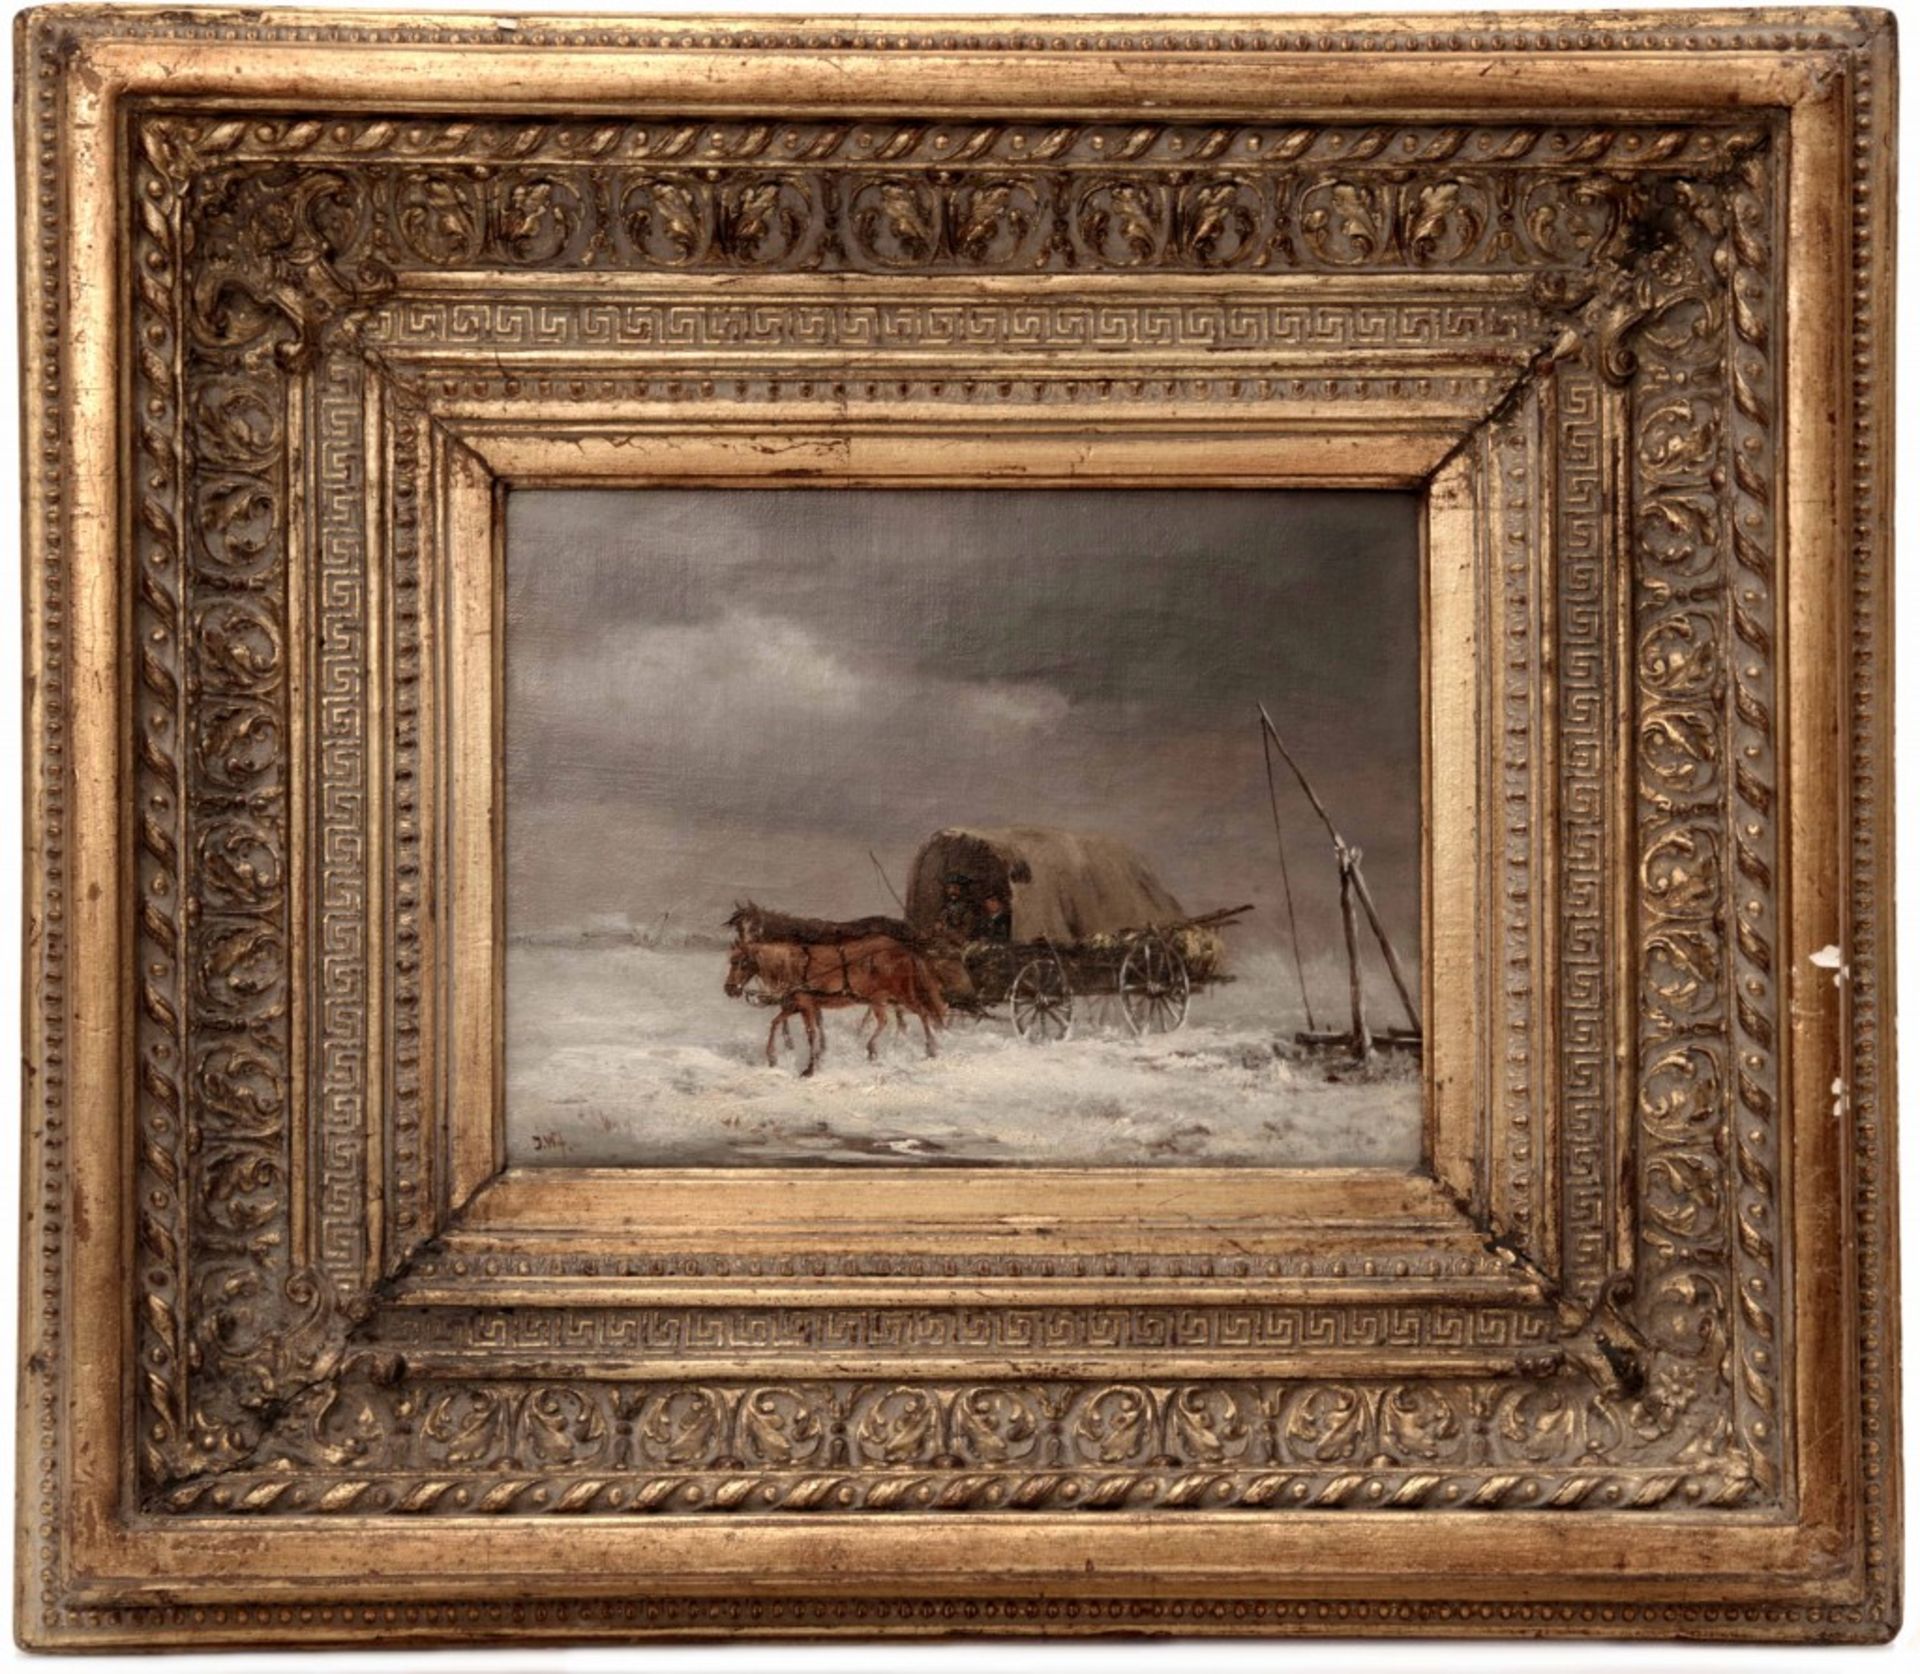 Winter Landscape with Horses Pulling a Wagon by Joseph Wolfram